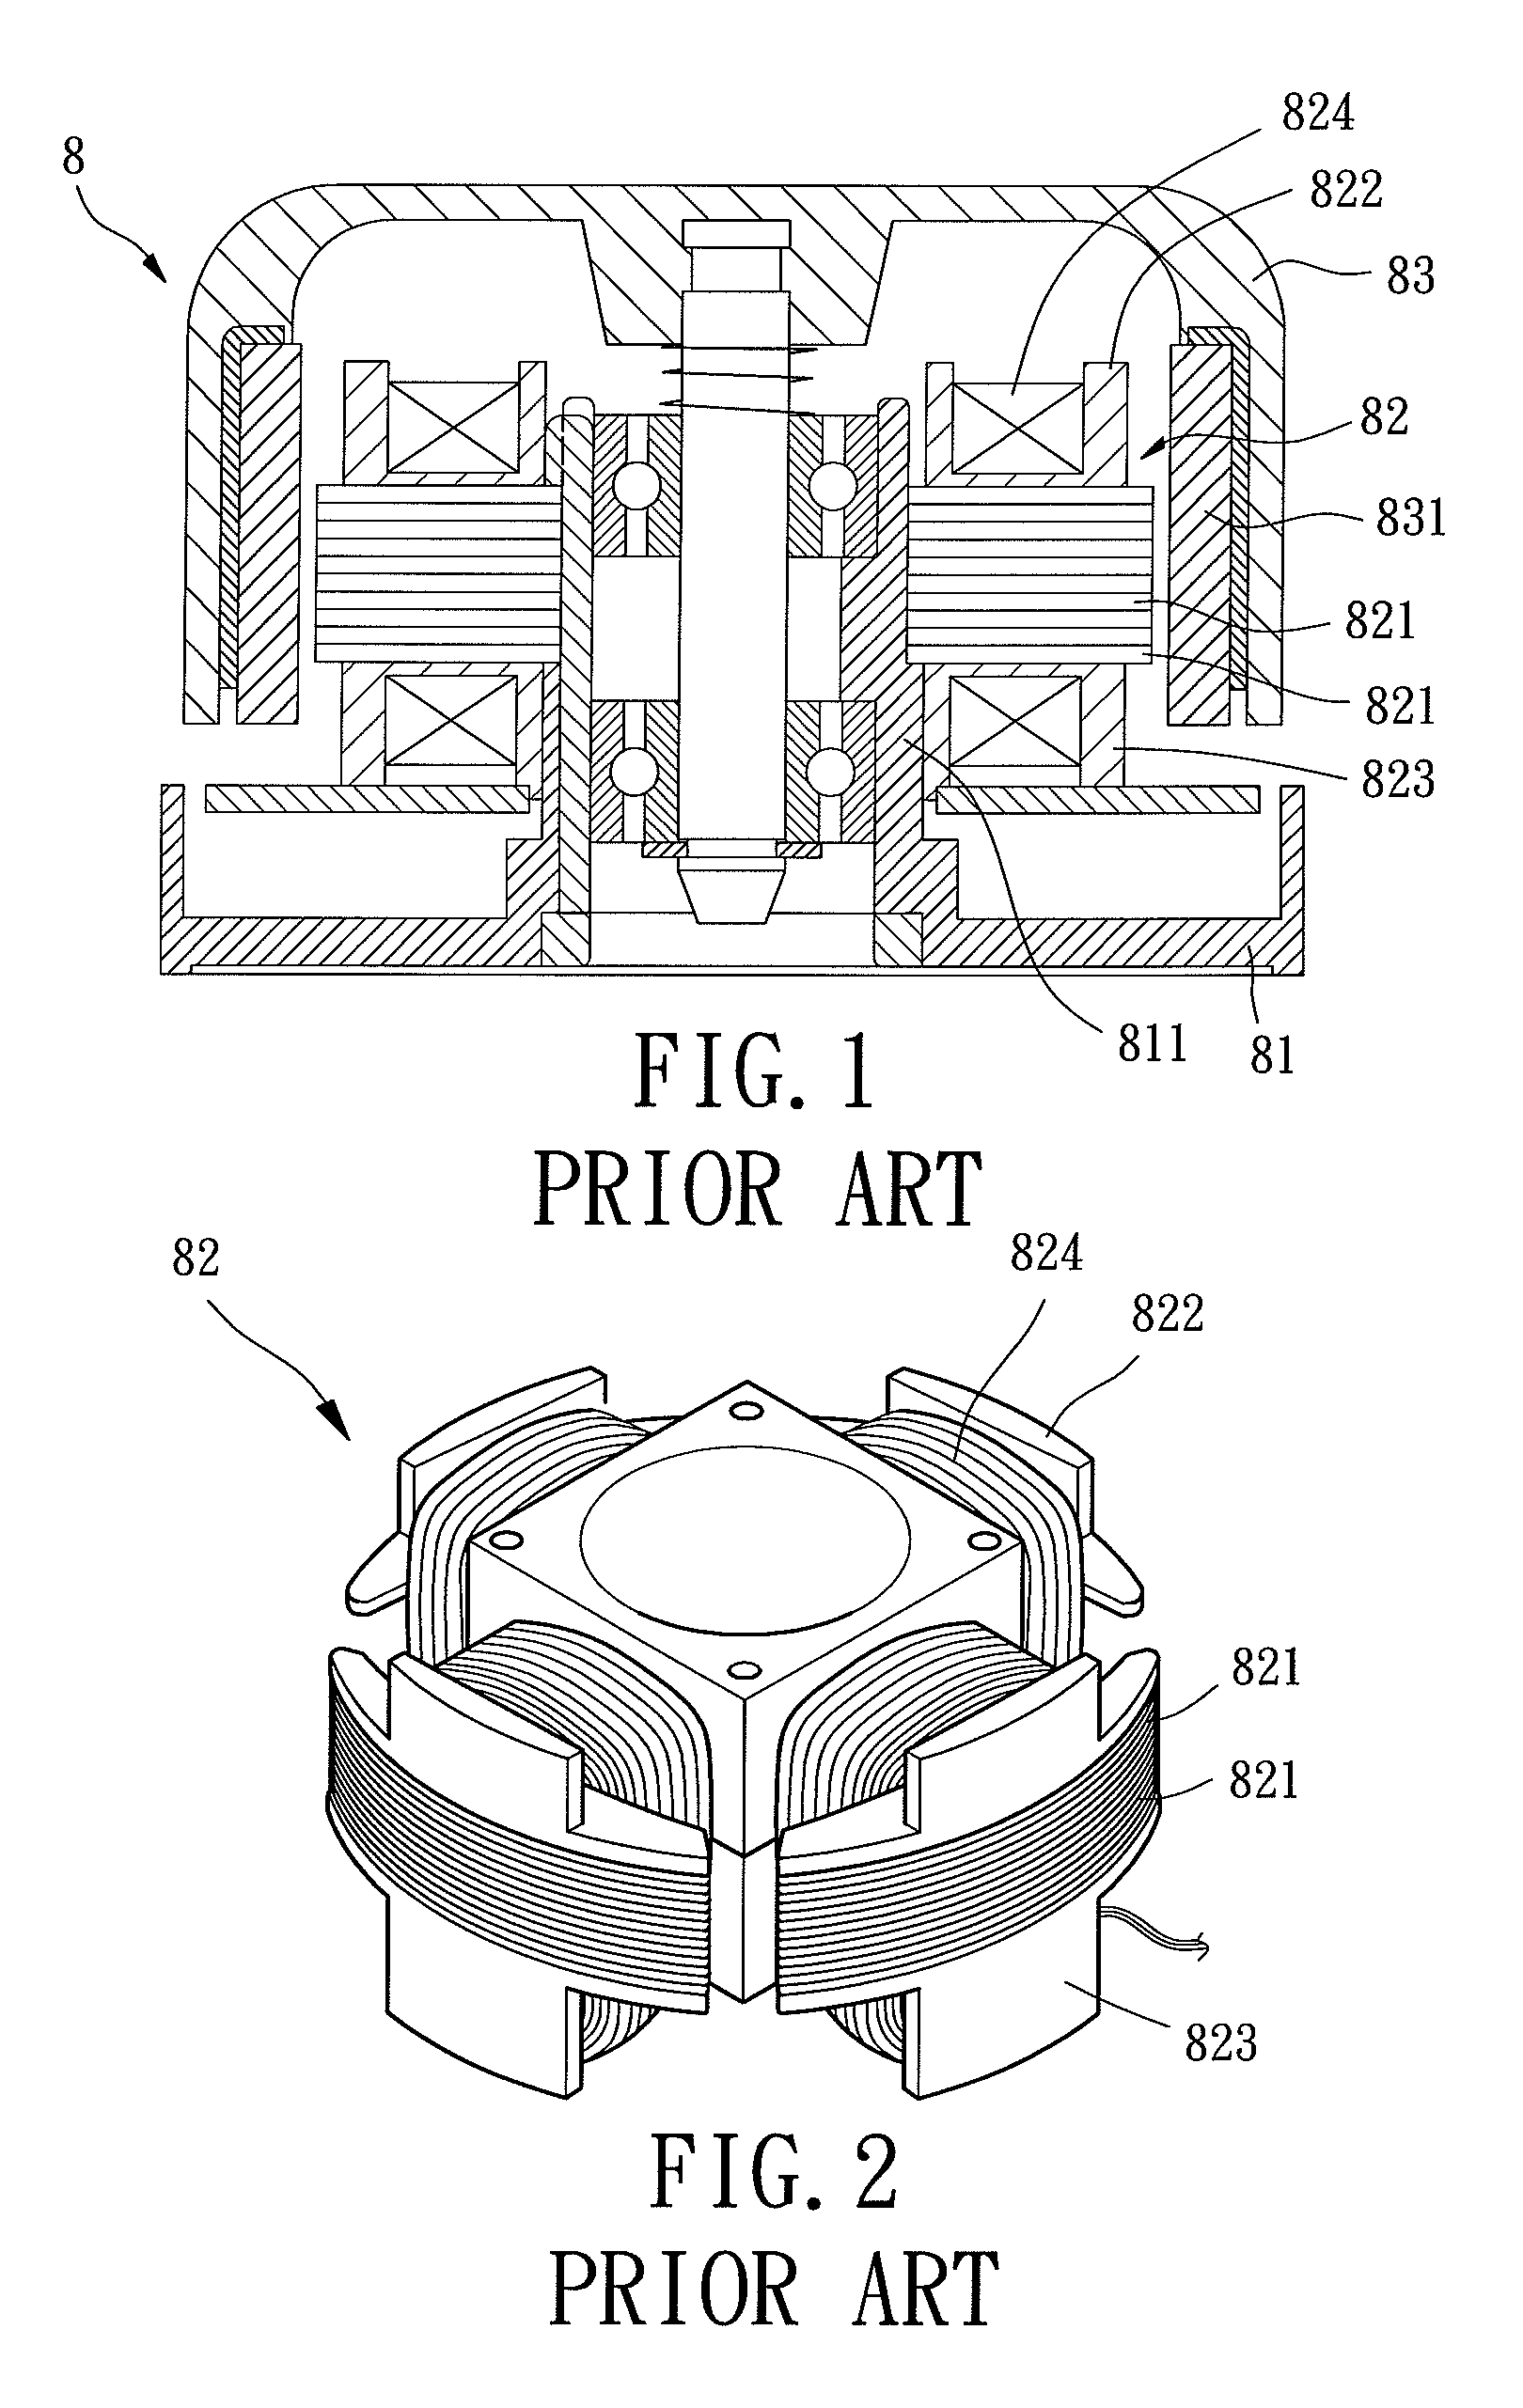 Stator and DC brushless motors including the stator